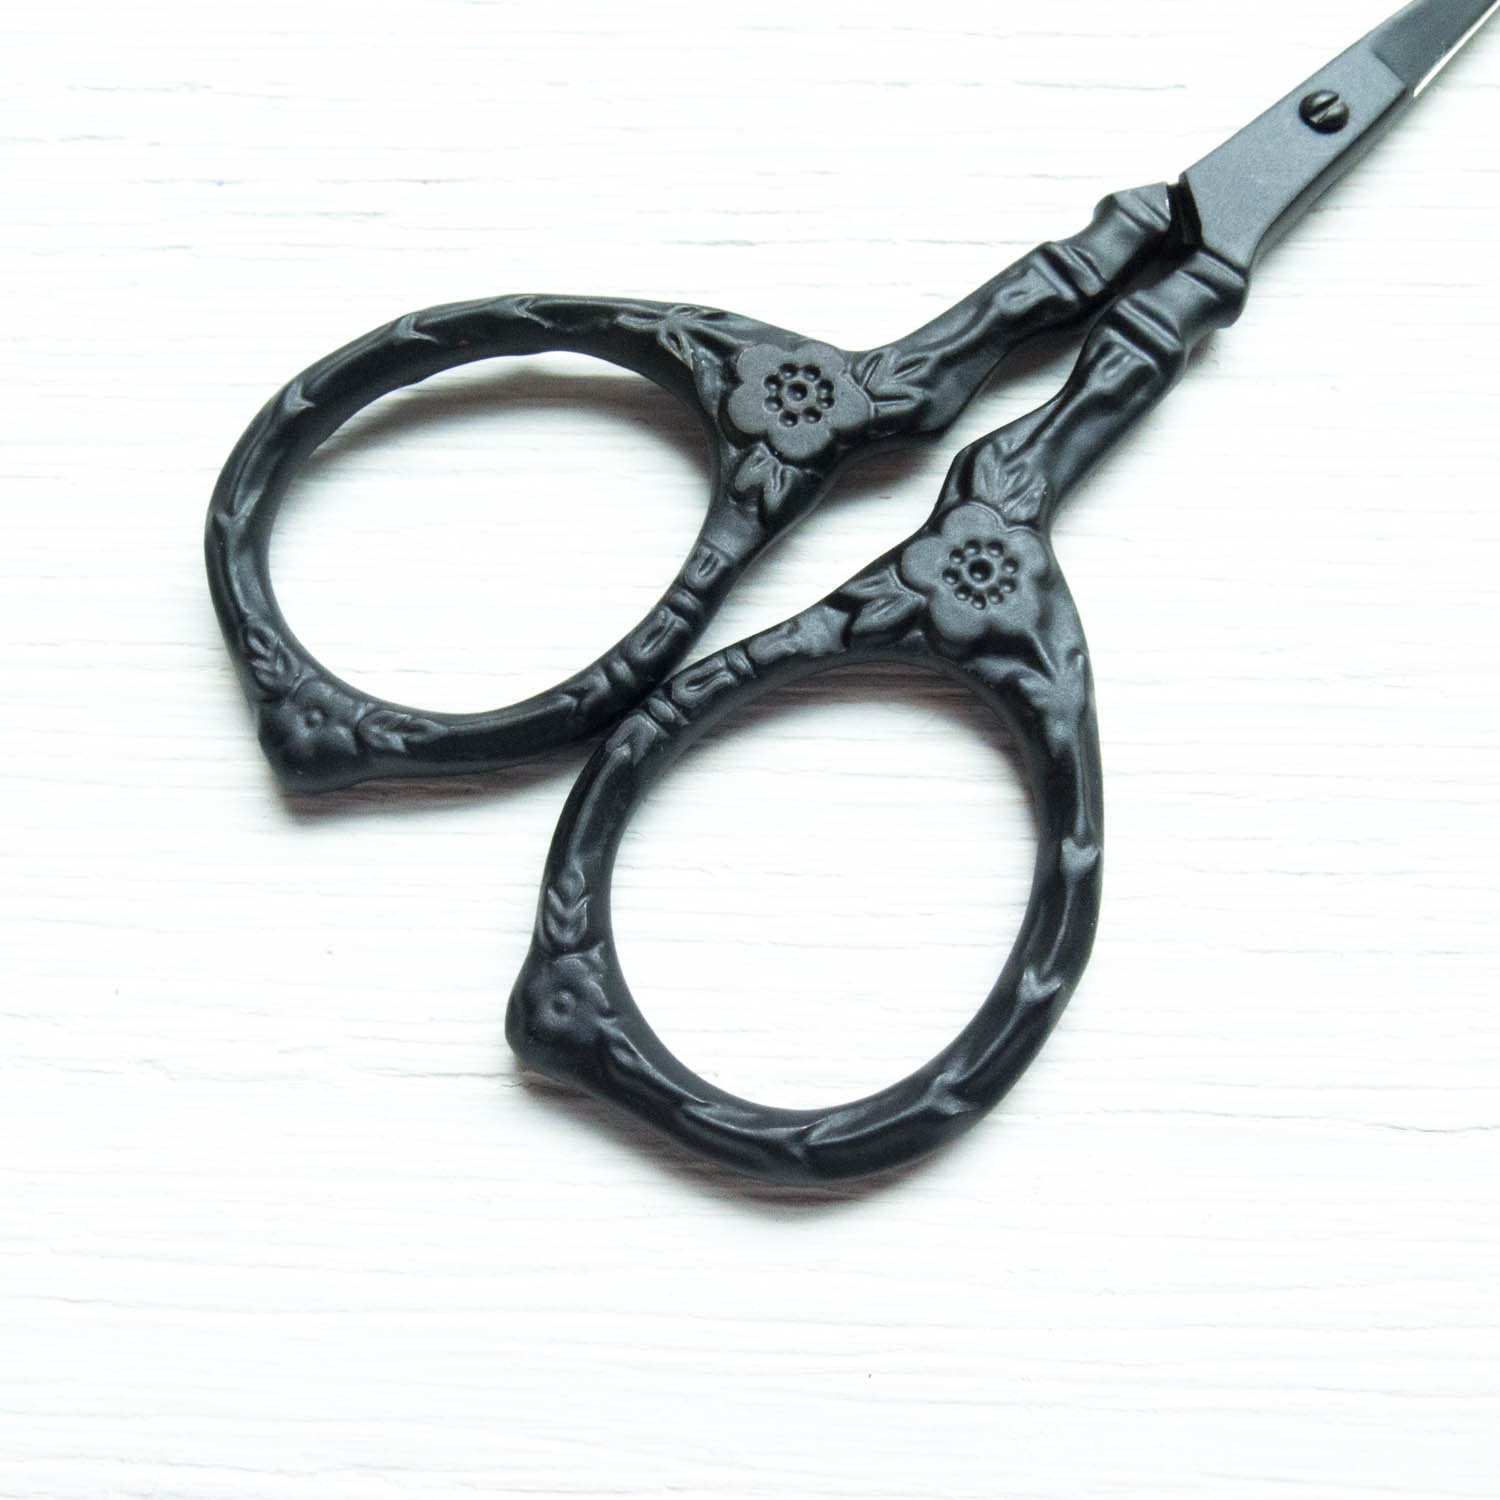 Scissors With Butterfly Handles Small, Crochet, Embroidery, Knitting,  Sewing, Crafting, Asian Design Bonsai Scissors 